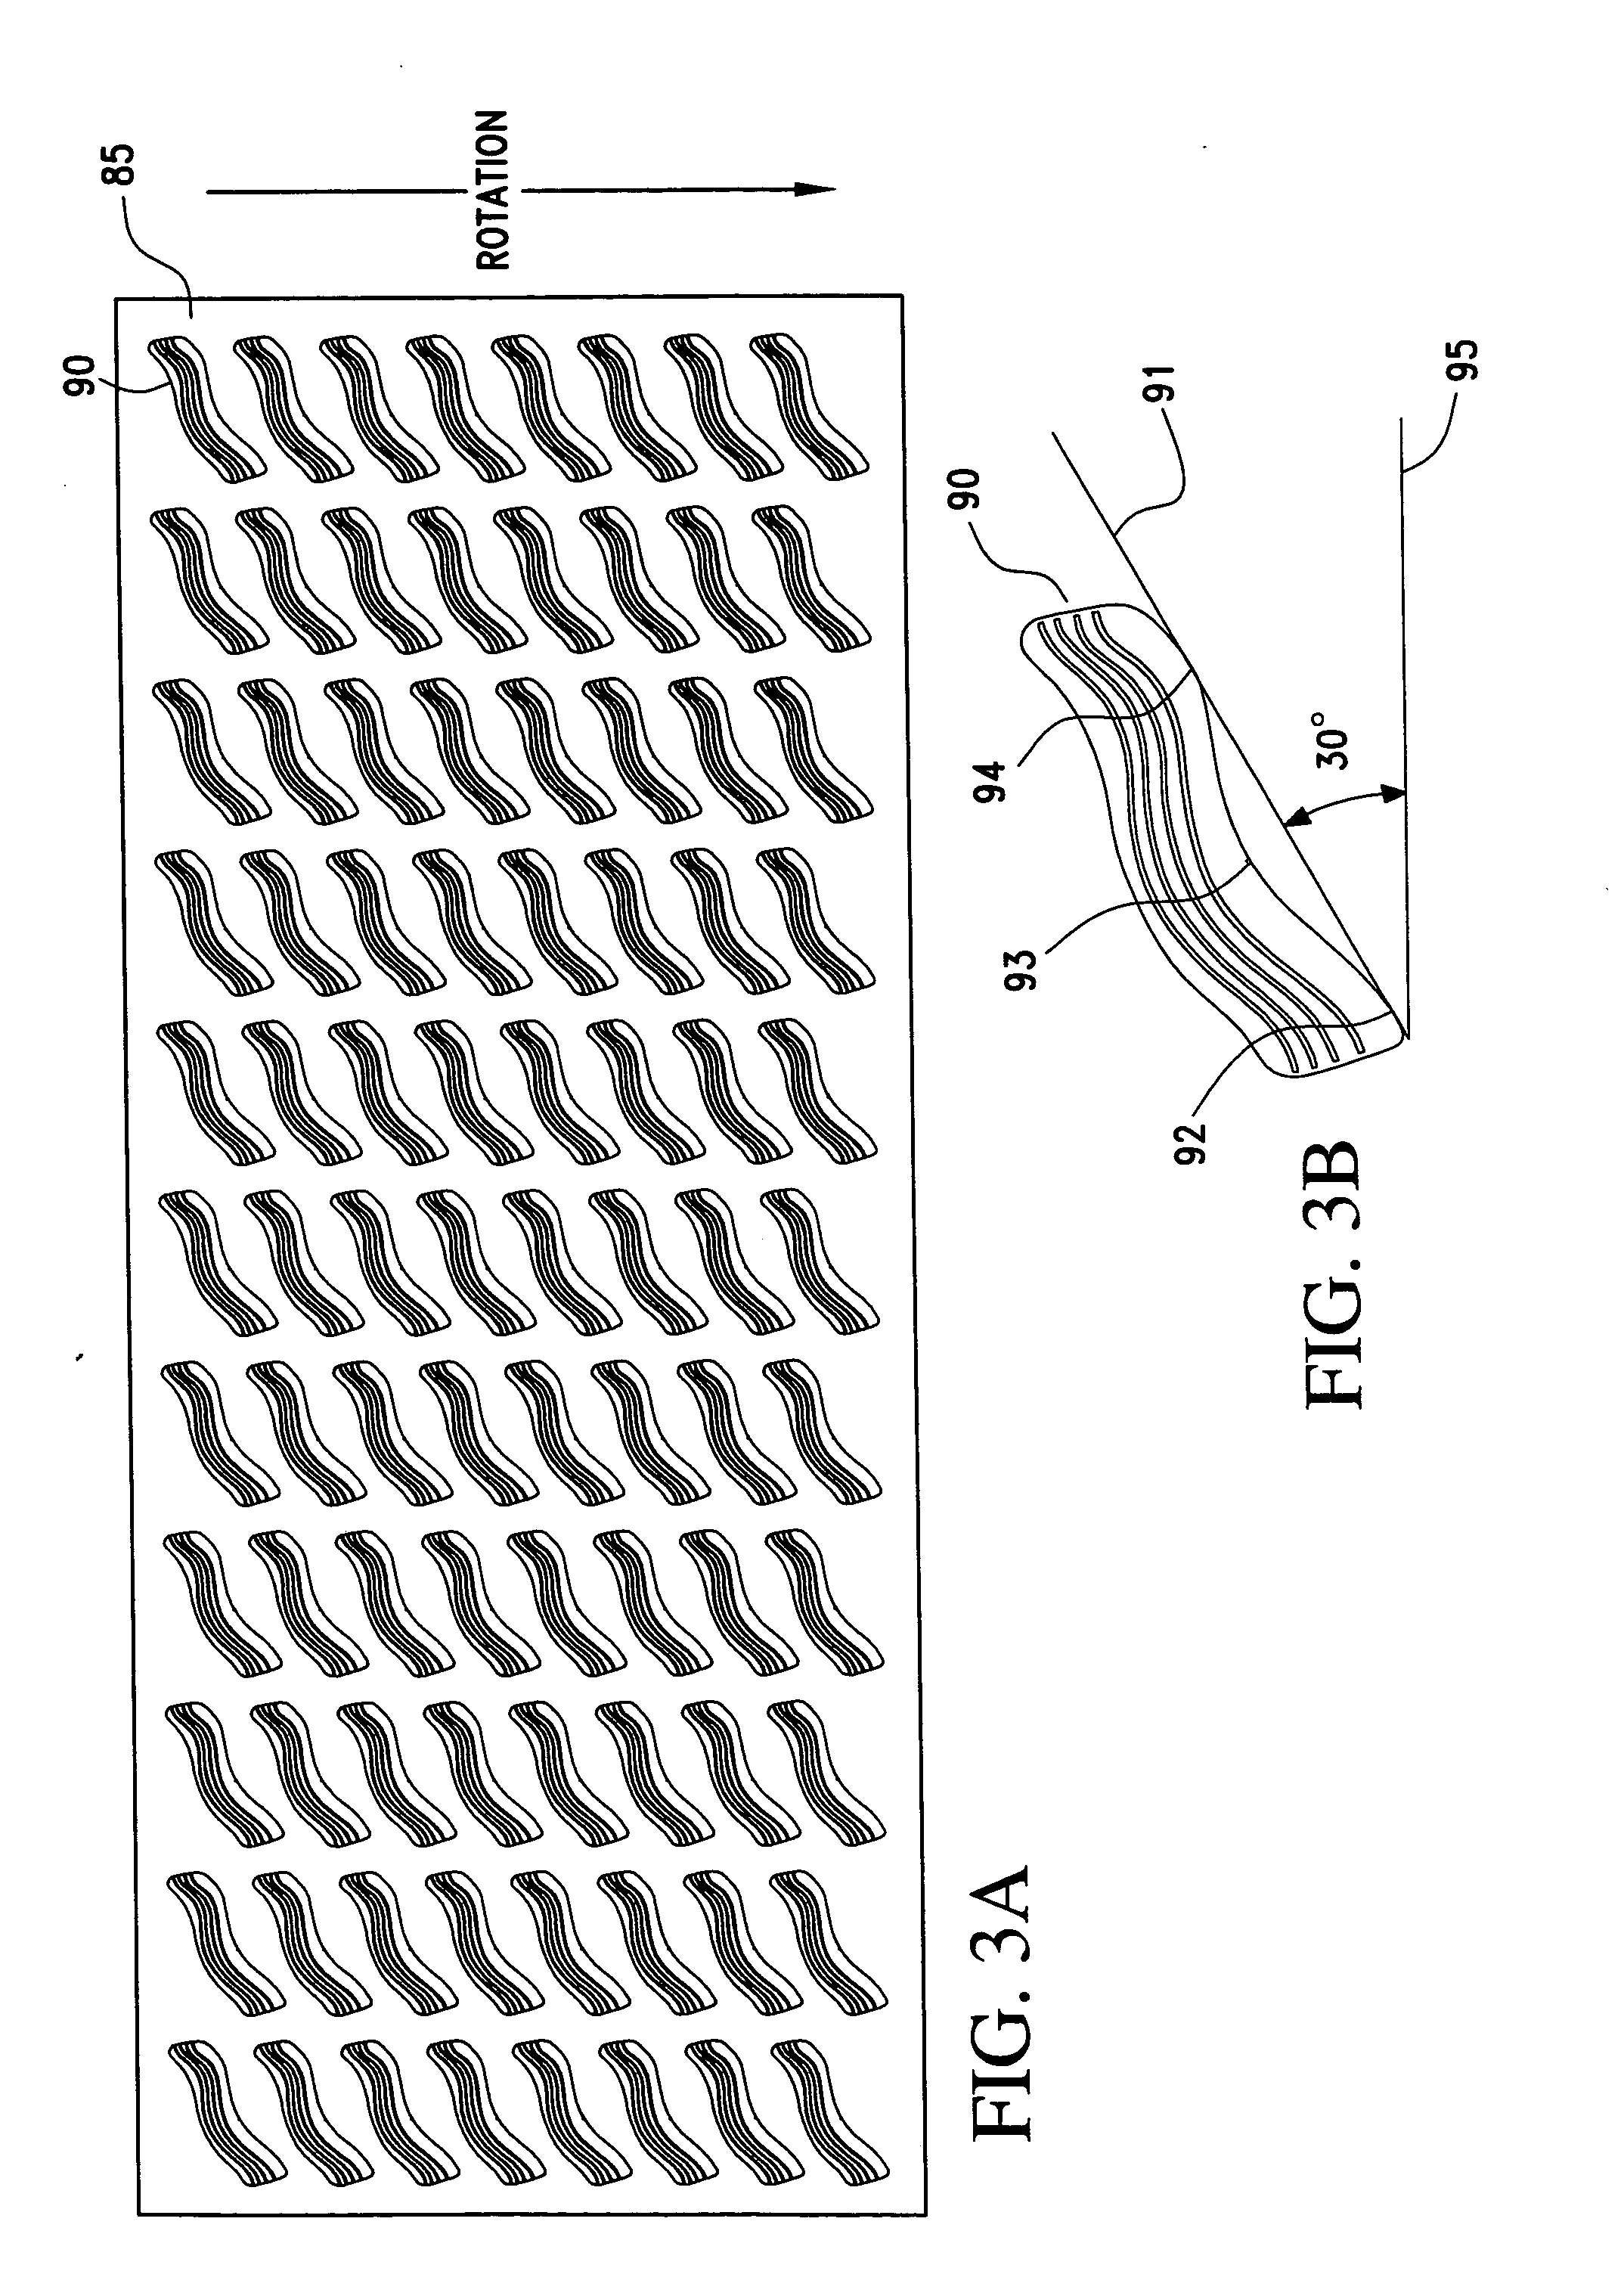 Meat-containing, strip-shaped food product and method of making same